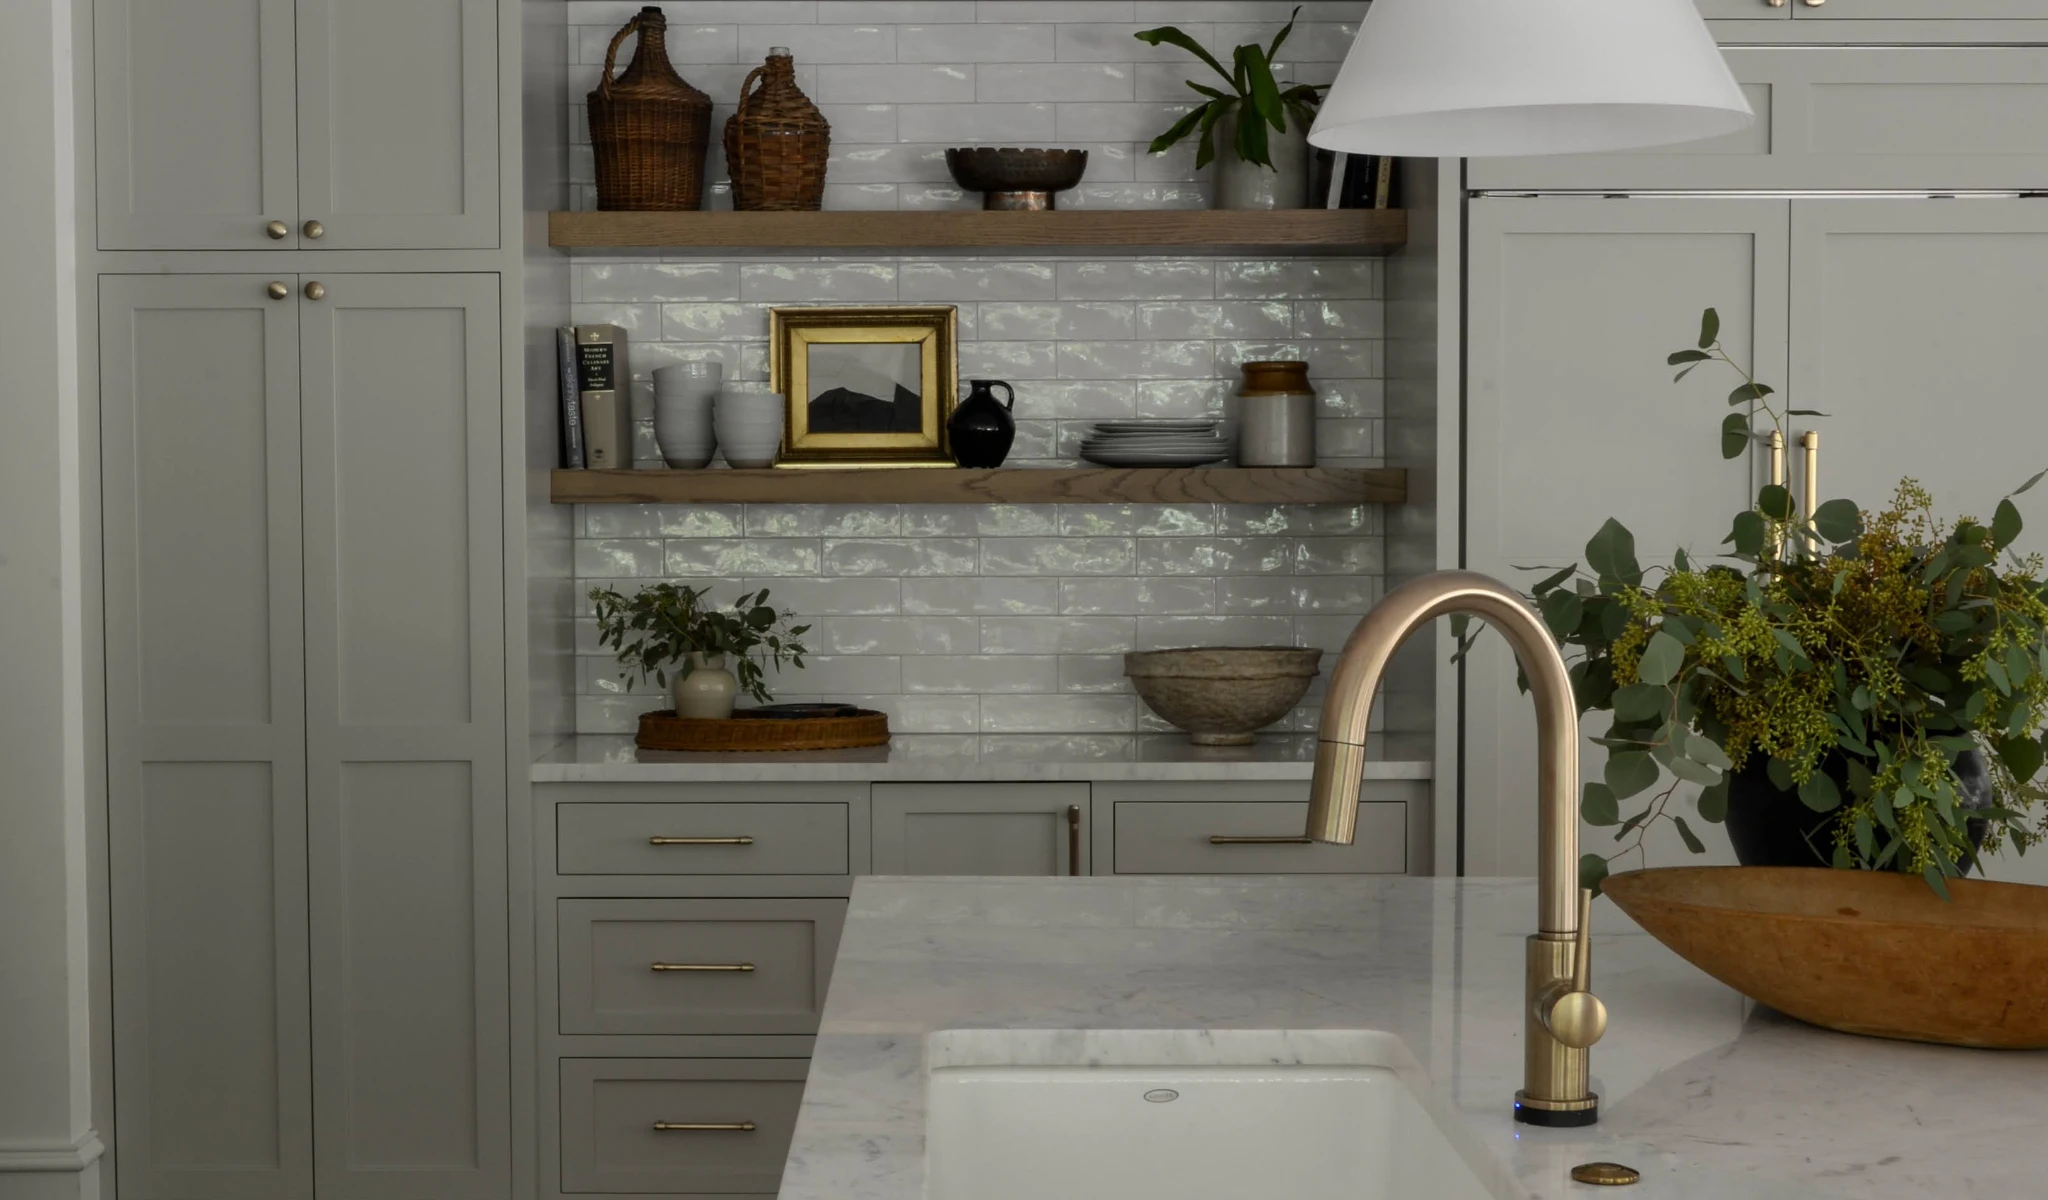 A kitchen with white cabinets and a gold faucet.